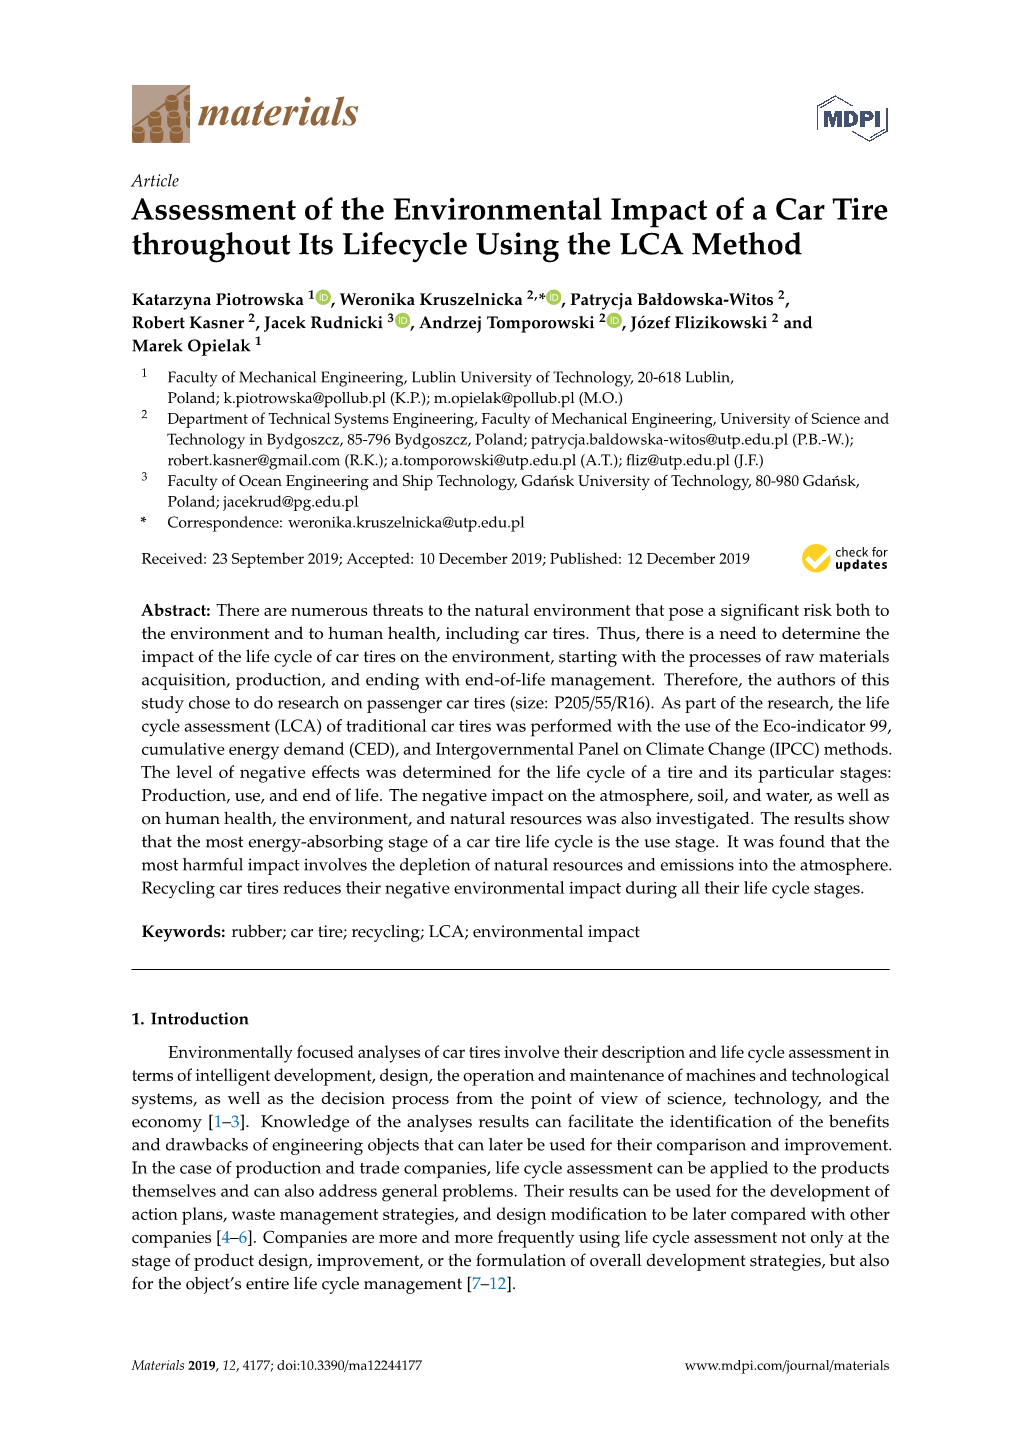 Assessment of the Environmental Impact of a Car Tire Throughout Its Lifecycle Using the LCA Method